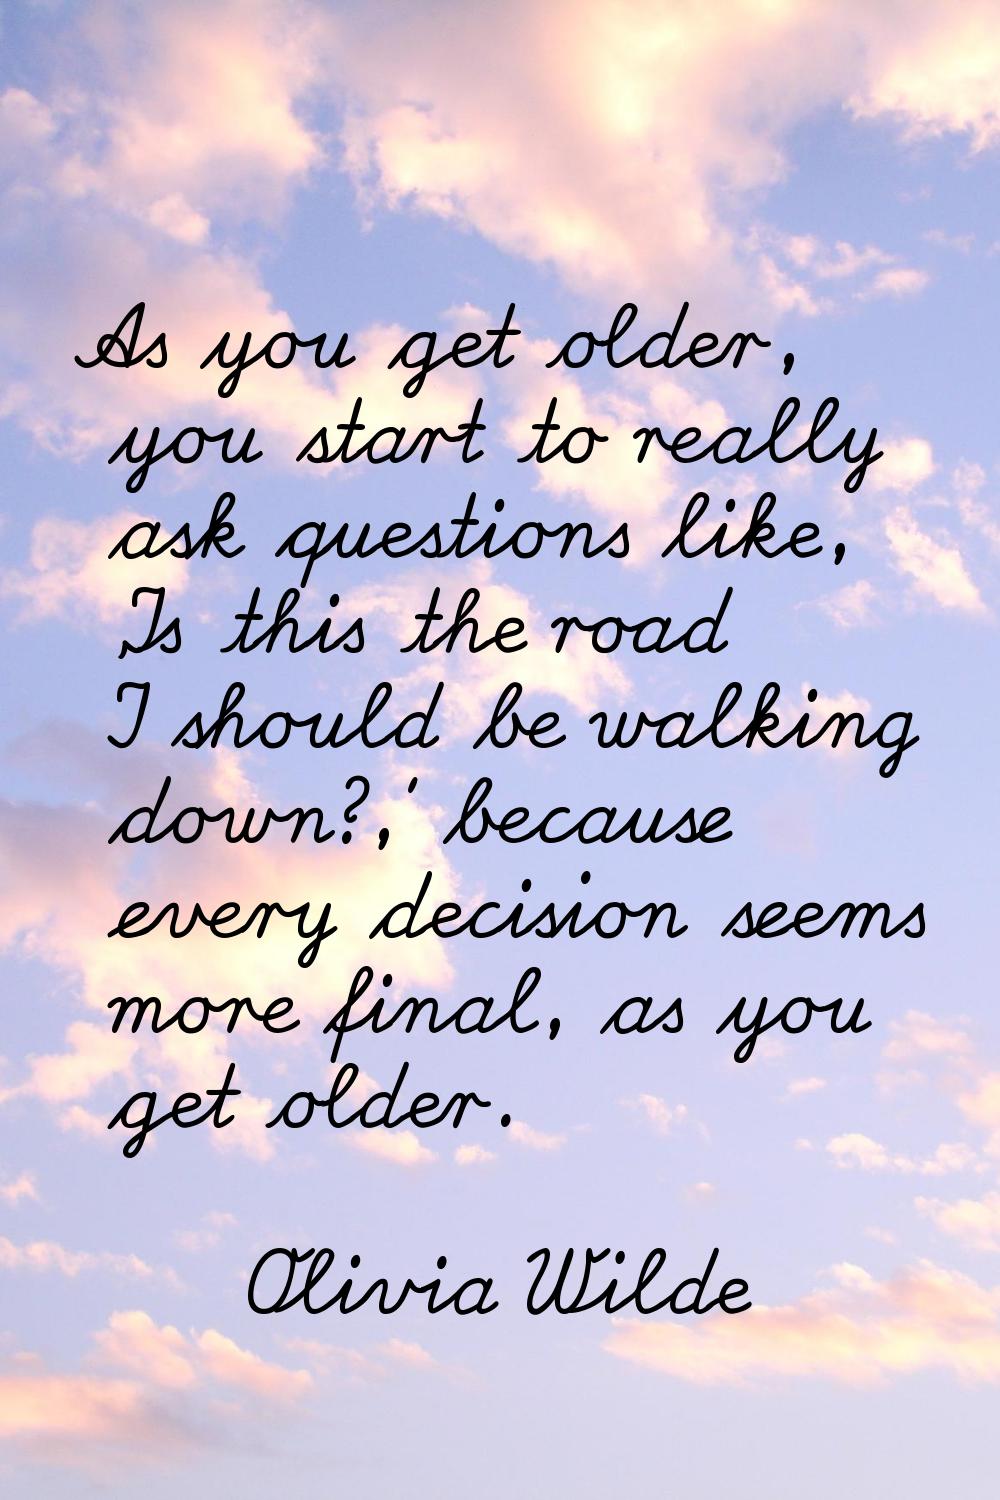 As you get older, you start to really ask questions like, 'Is this the road I should be walking dow